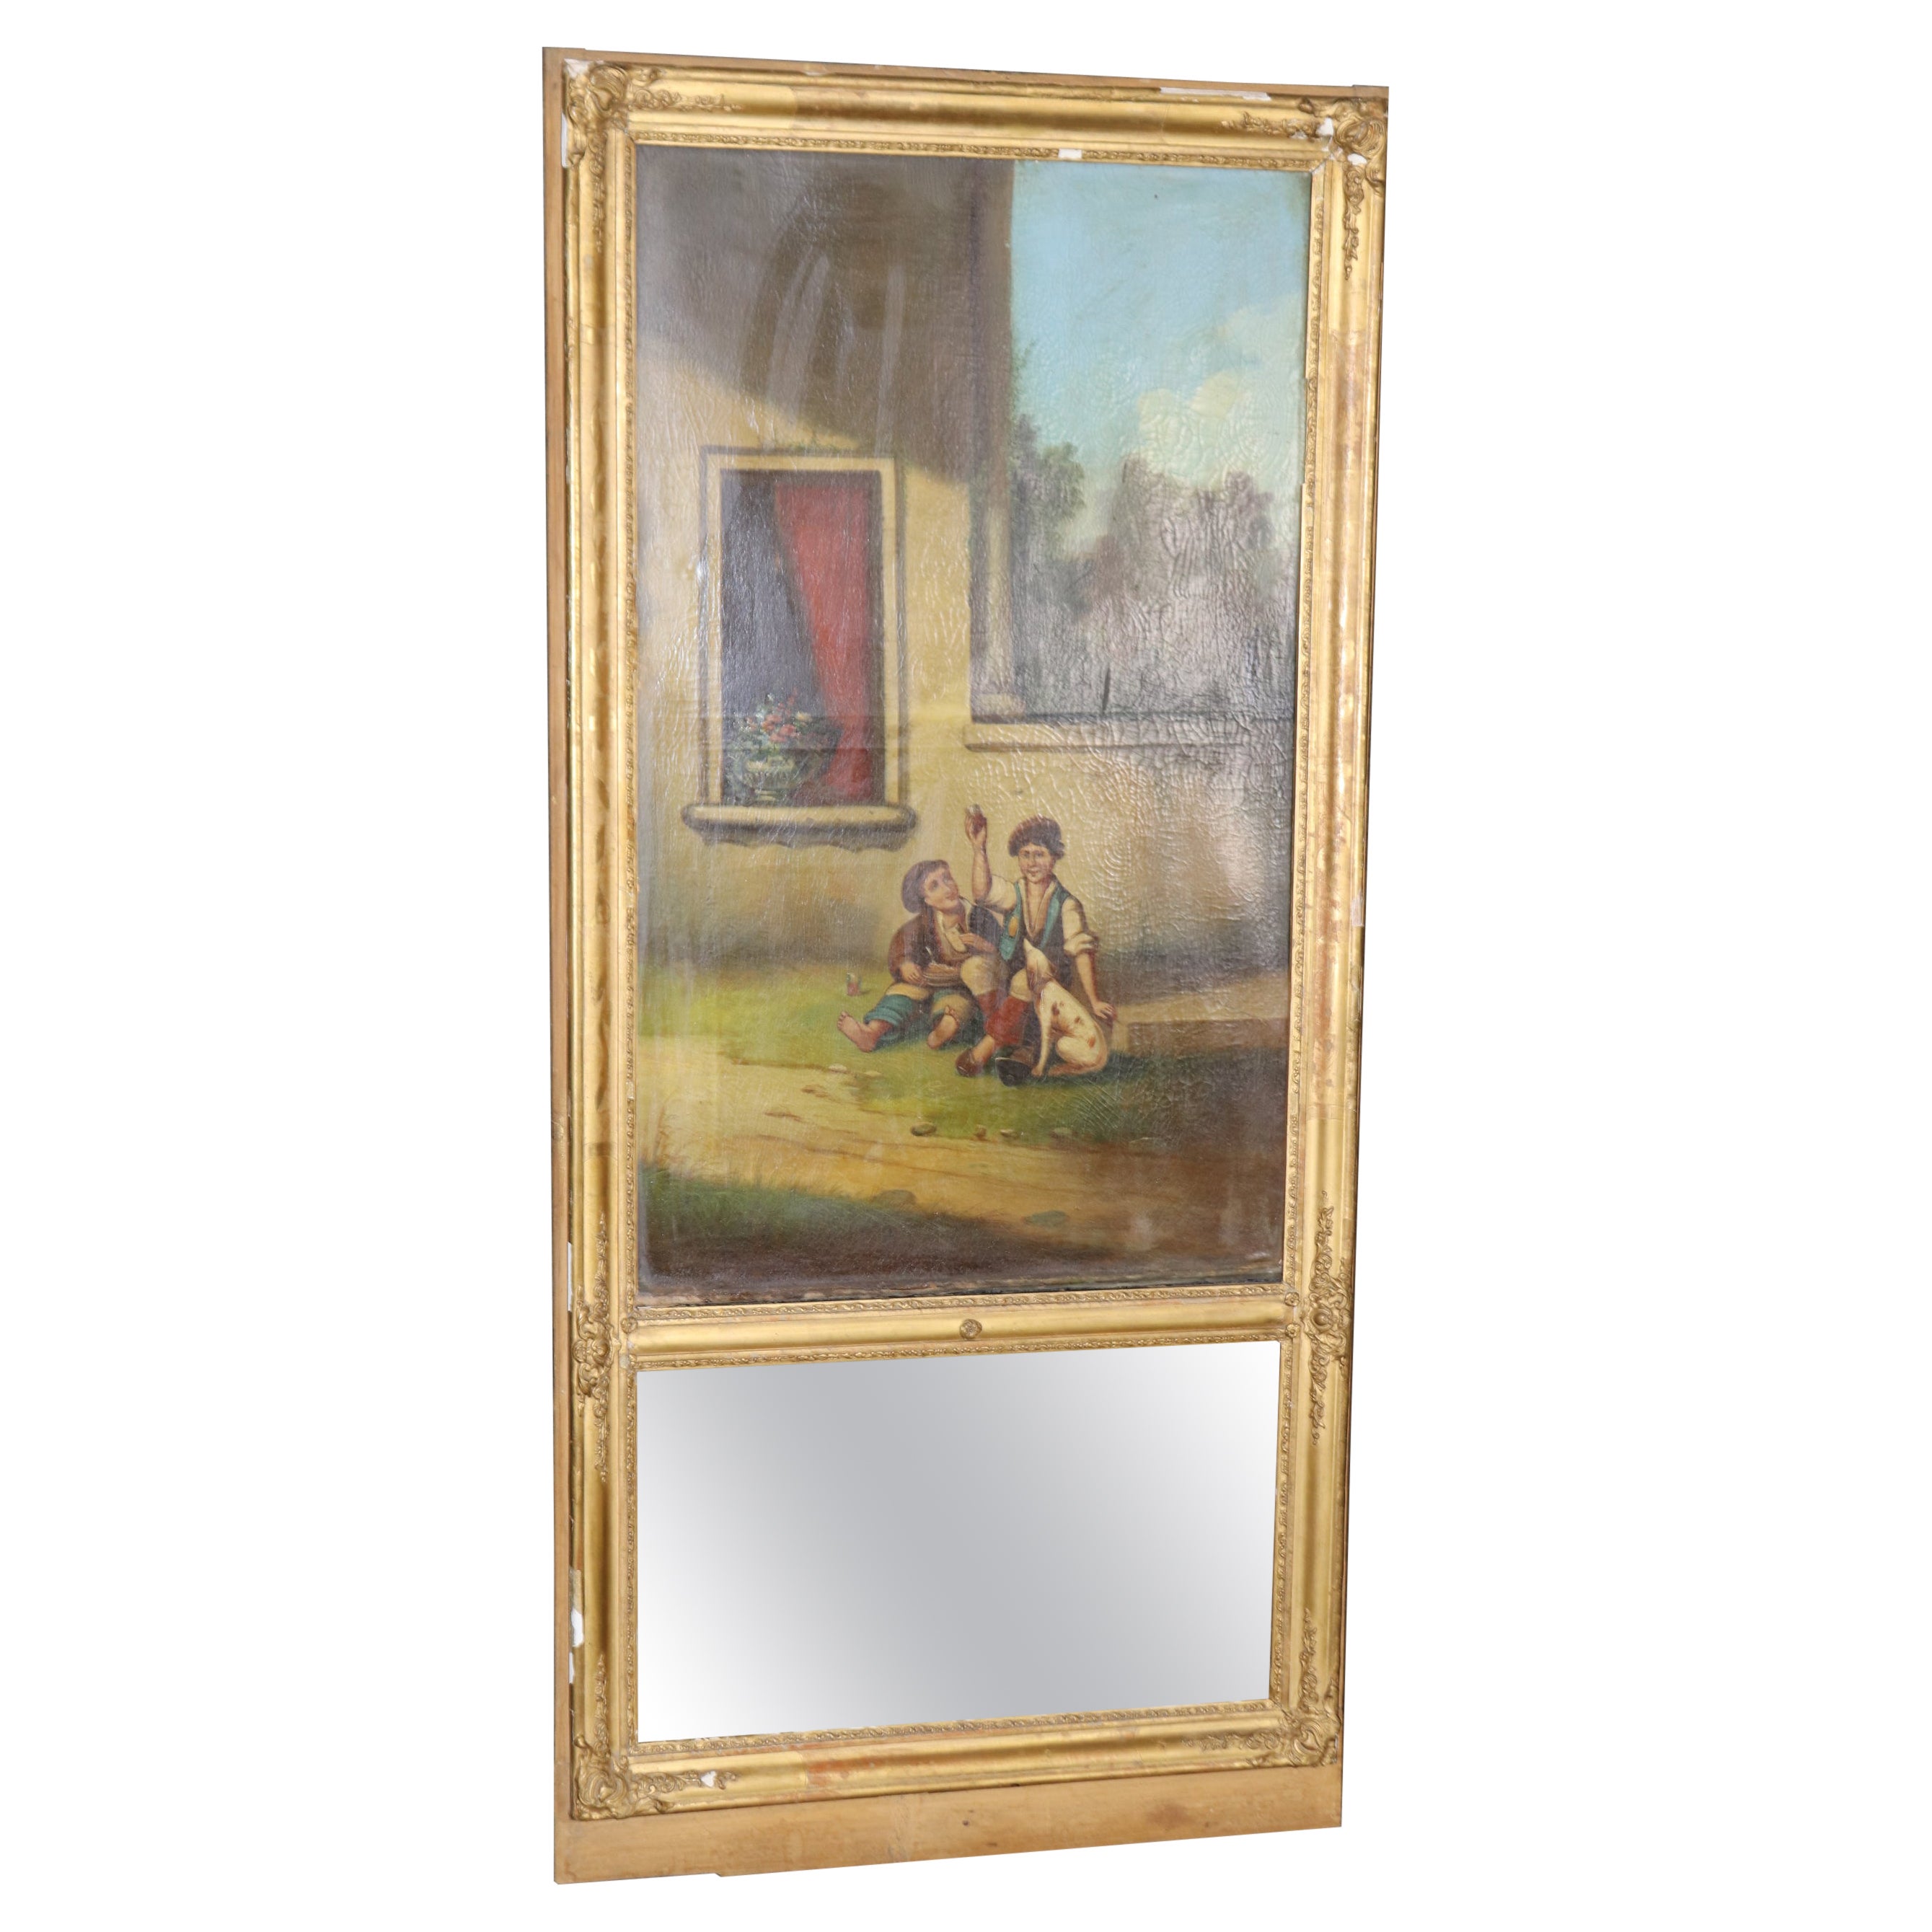   Fine Gilded Painted Trumeau Mirror with Two boys a Dog and their Sandwich For Sale